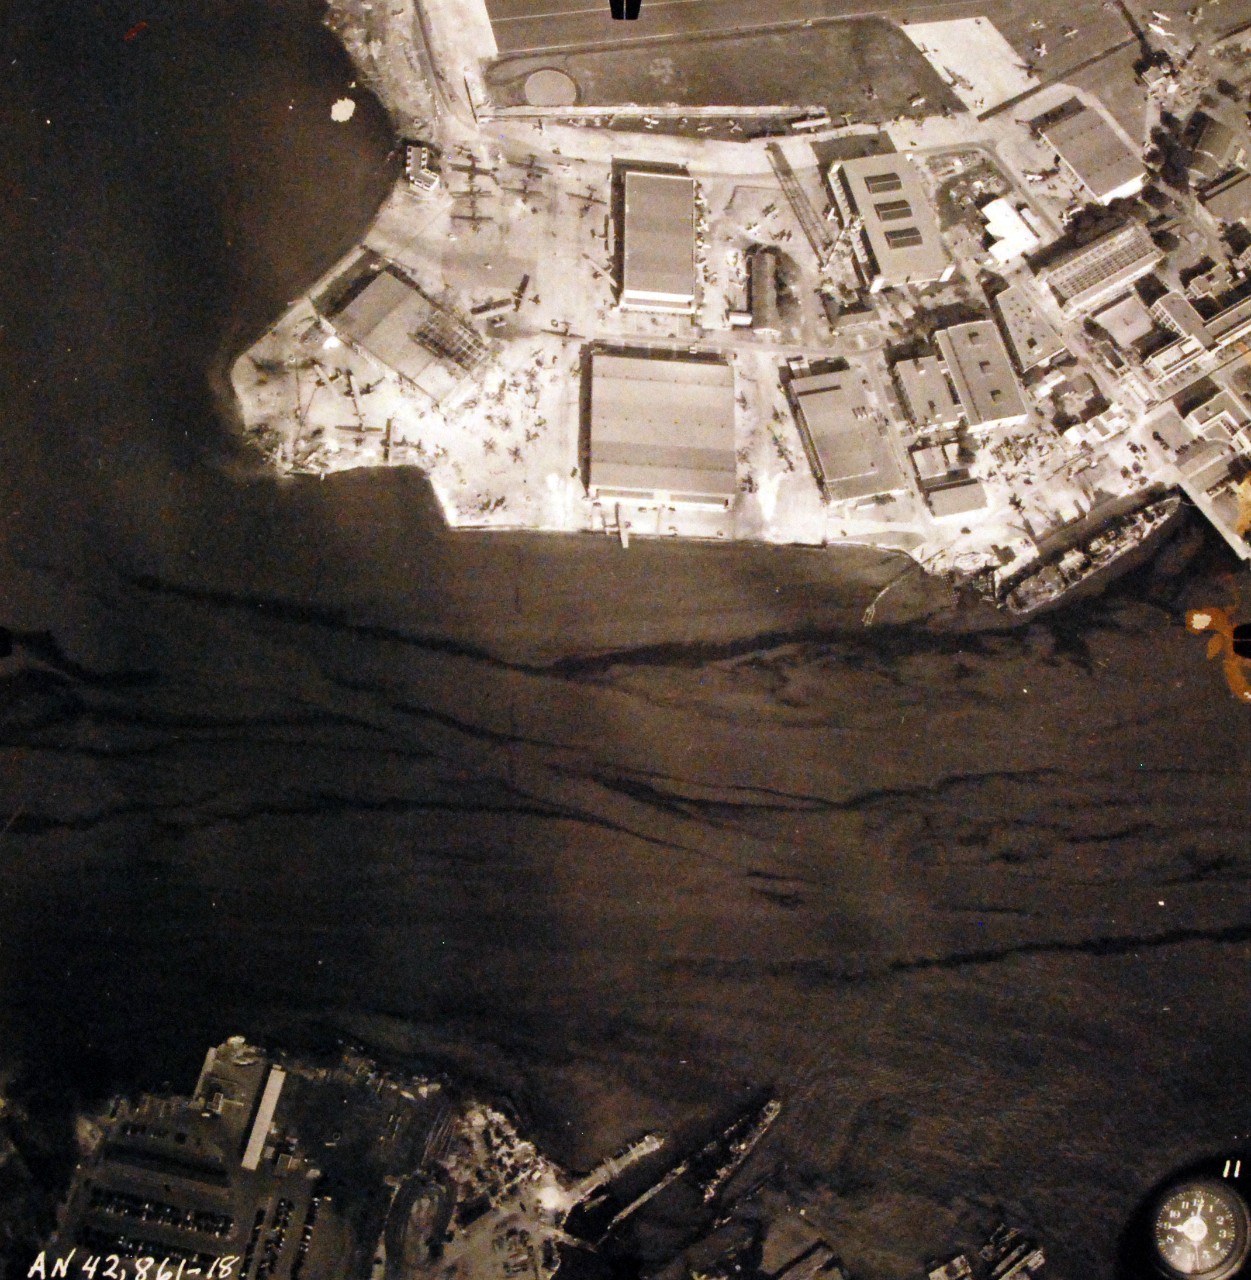 80-G-387579:  Pearl Harbor Attack, 7 December 1941.  Aerial view of "Battleship Row" moorings on the southern side of Ford Island, 10 December 1941, showing damage from the Japanese raid three days earlier.  Shown are USS Shaw (DD 373) and view of Naval Air Station Ford Island.  Note dark oil streaks on the harbor surface, originating from the sunken battleships. Photographed by VJ-1 at an altitude of 3,000 feet and released November 9, 1950. U.S. Navy photograph, now in the collections of the National Archives.       (9/22/2015).